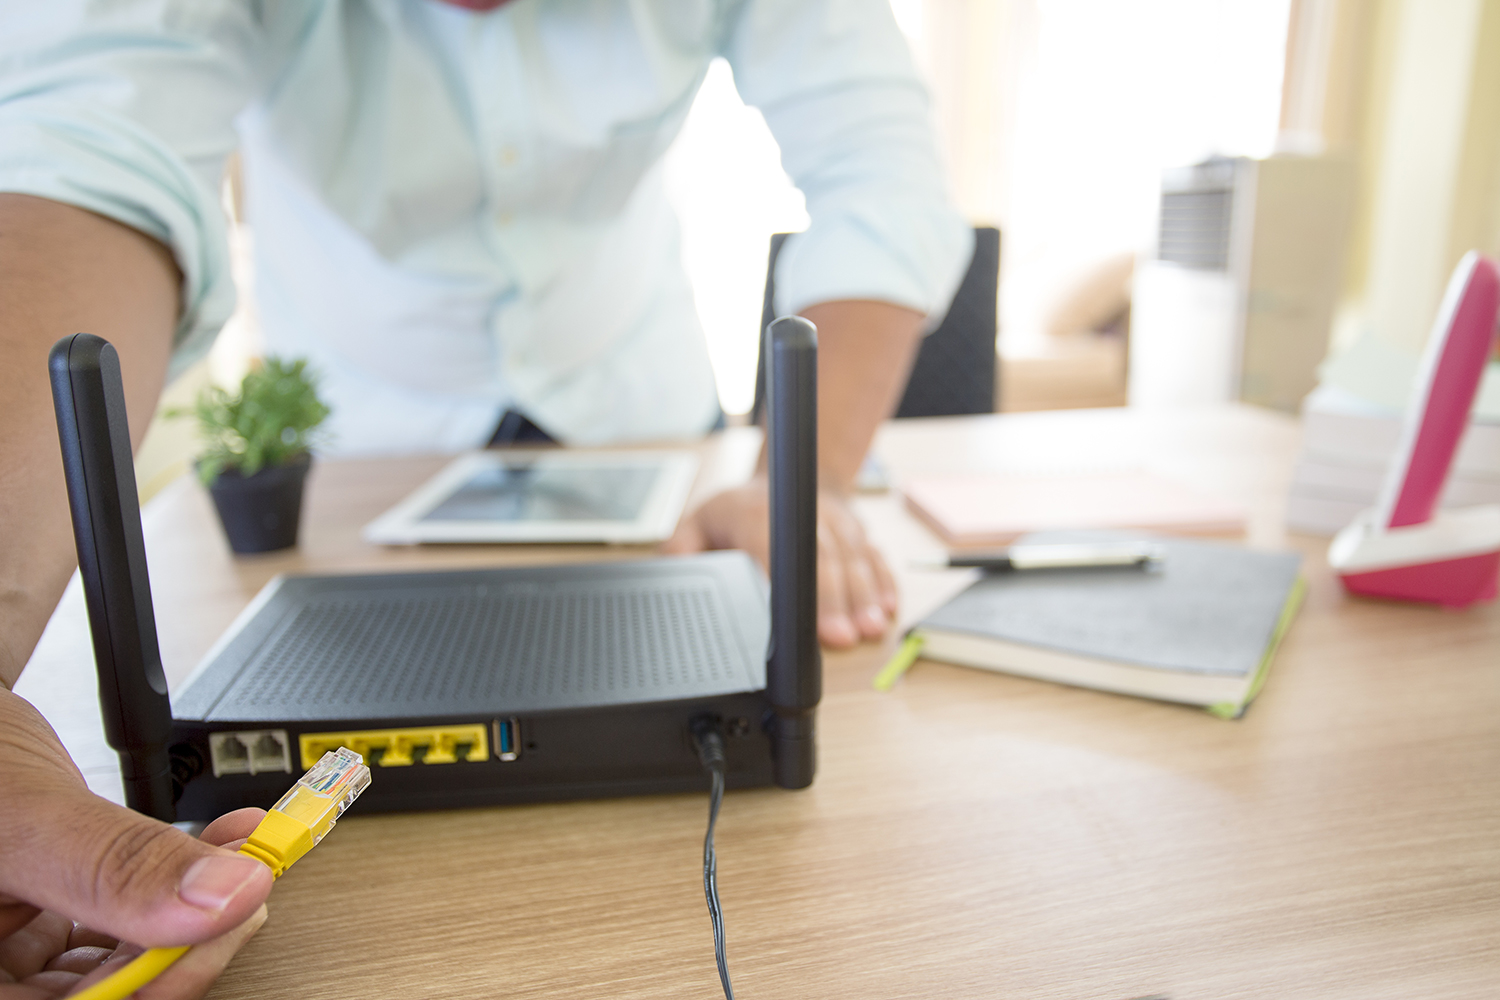 How to Set Up a Wireless Network From Start to Finish